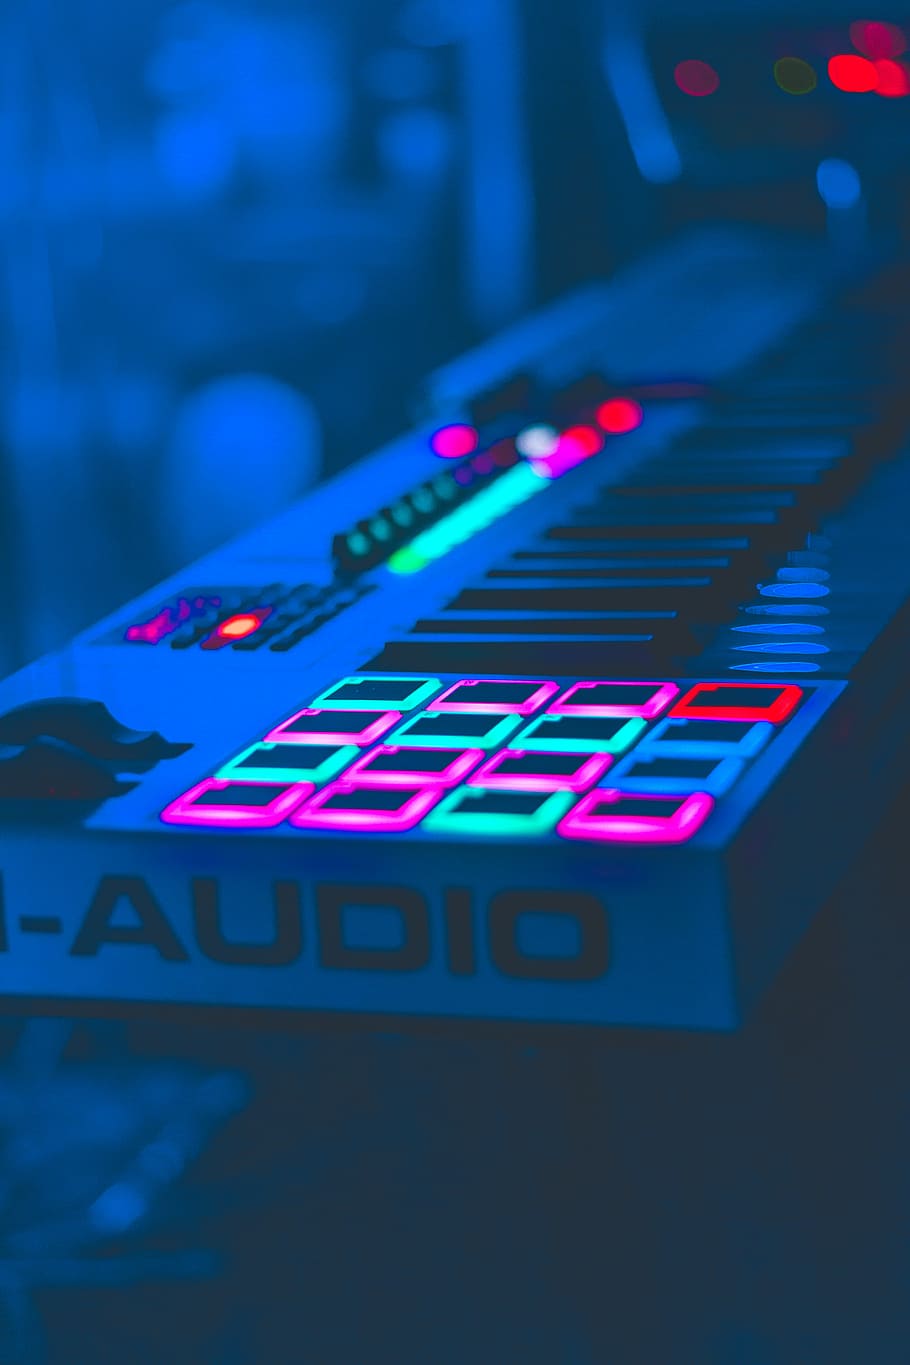 turned on electronic keyboard, M-audio synthesizer, buttons, light, HD wallpaper